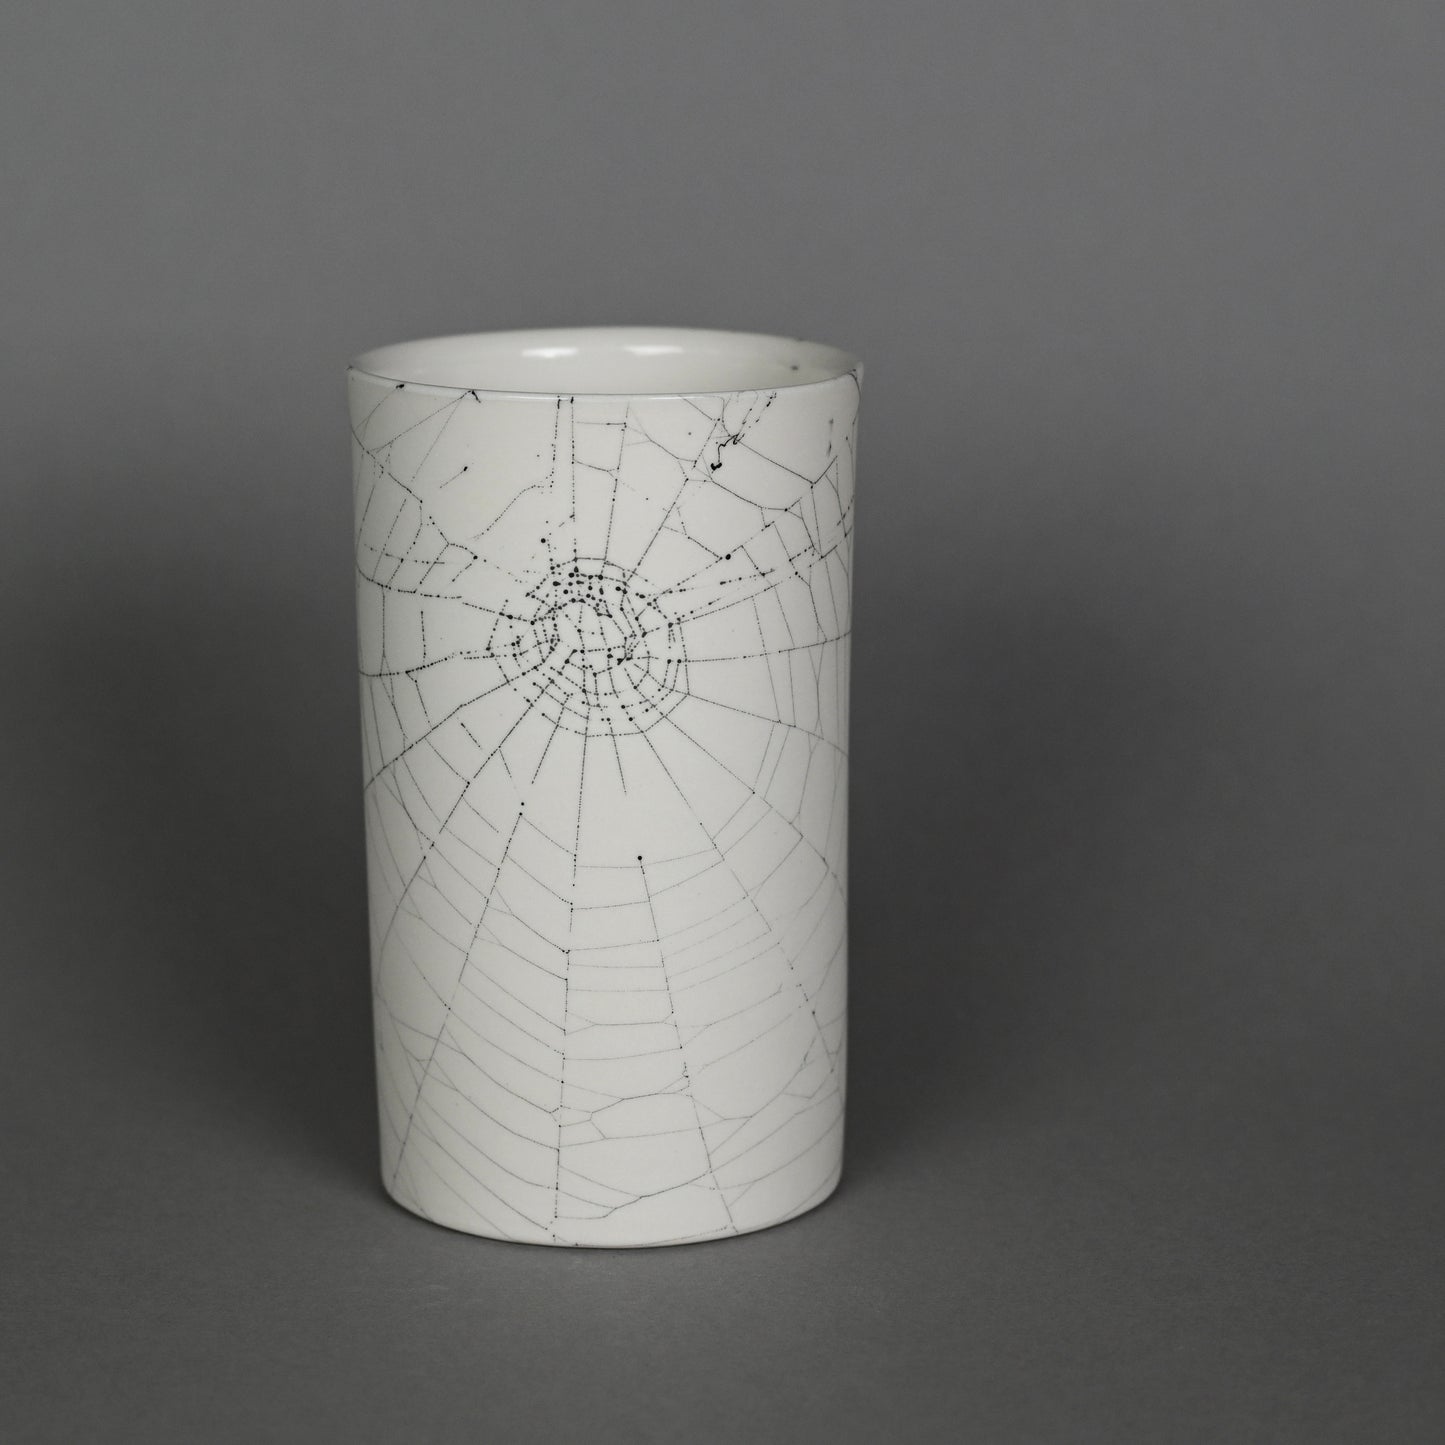 Web on Clay (200), Collected September 19, 2022